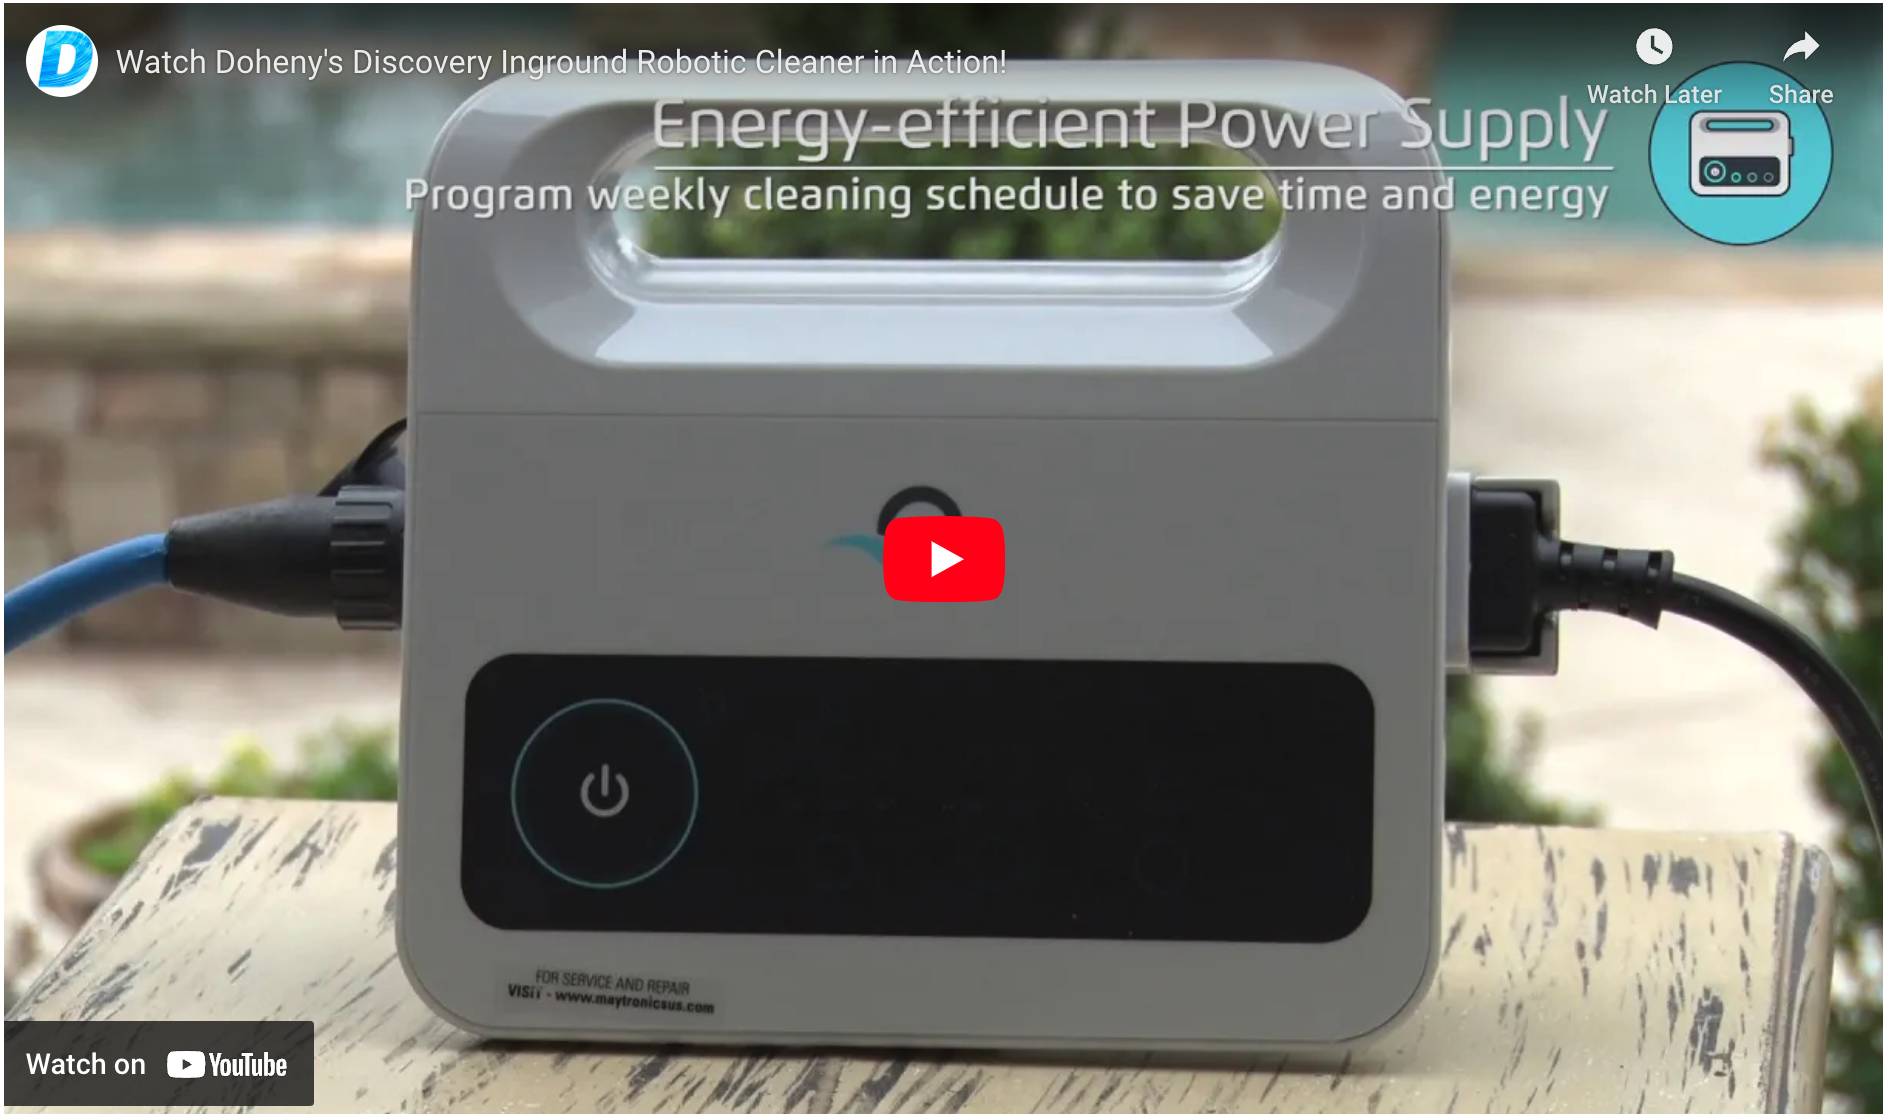 Doheny's Discovery Inground Robotic Cleaner in Action!